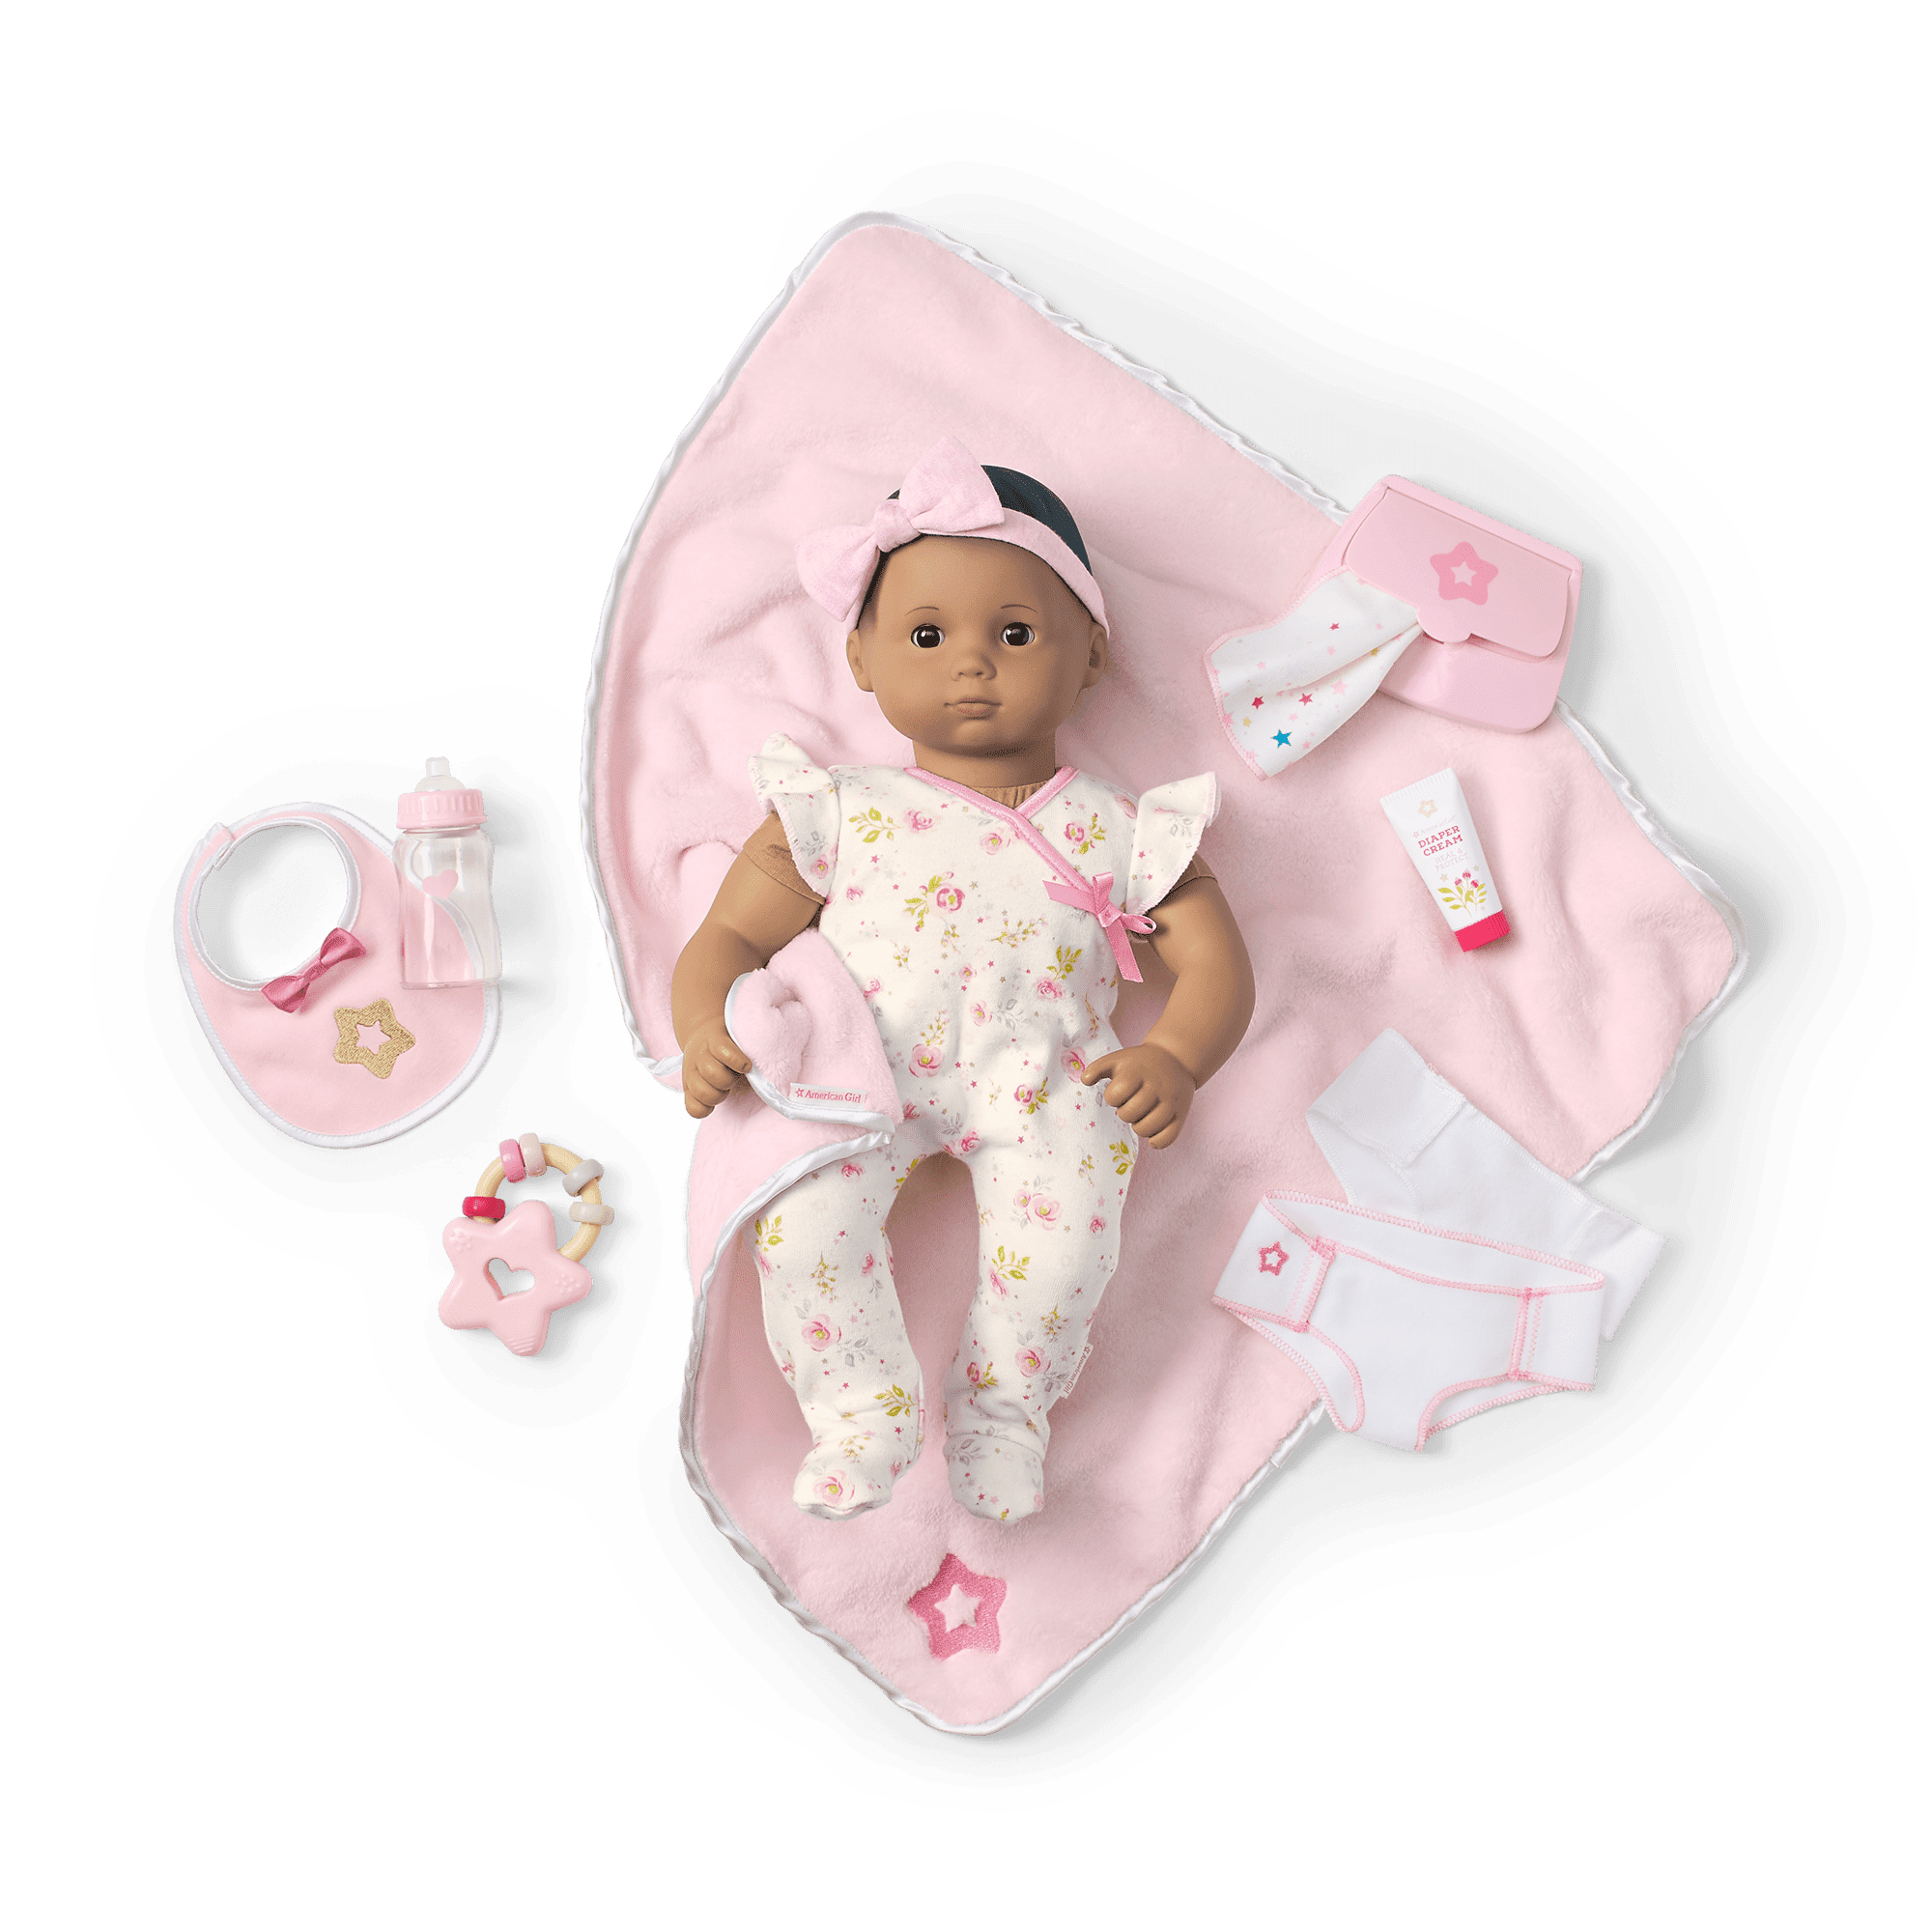 Bitty Baby® Doll #5 Care & Play Set